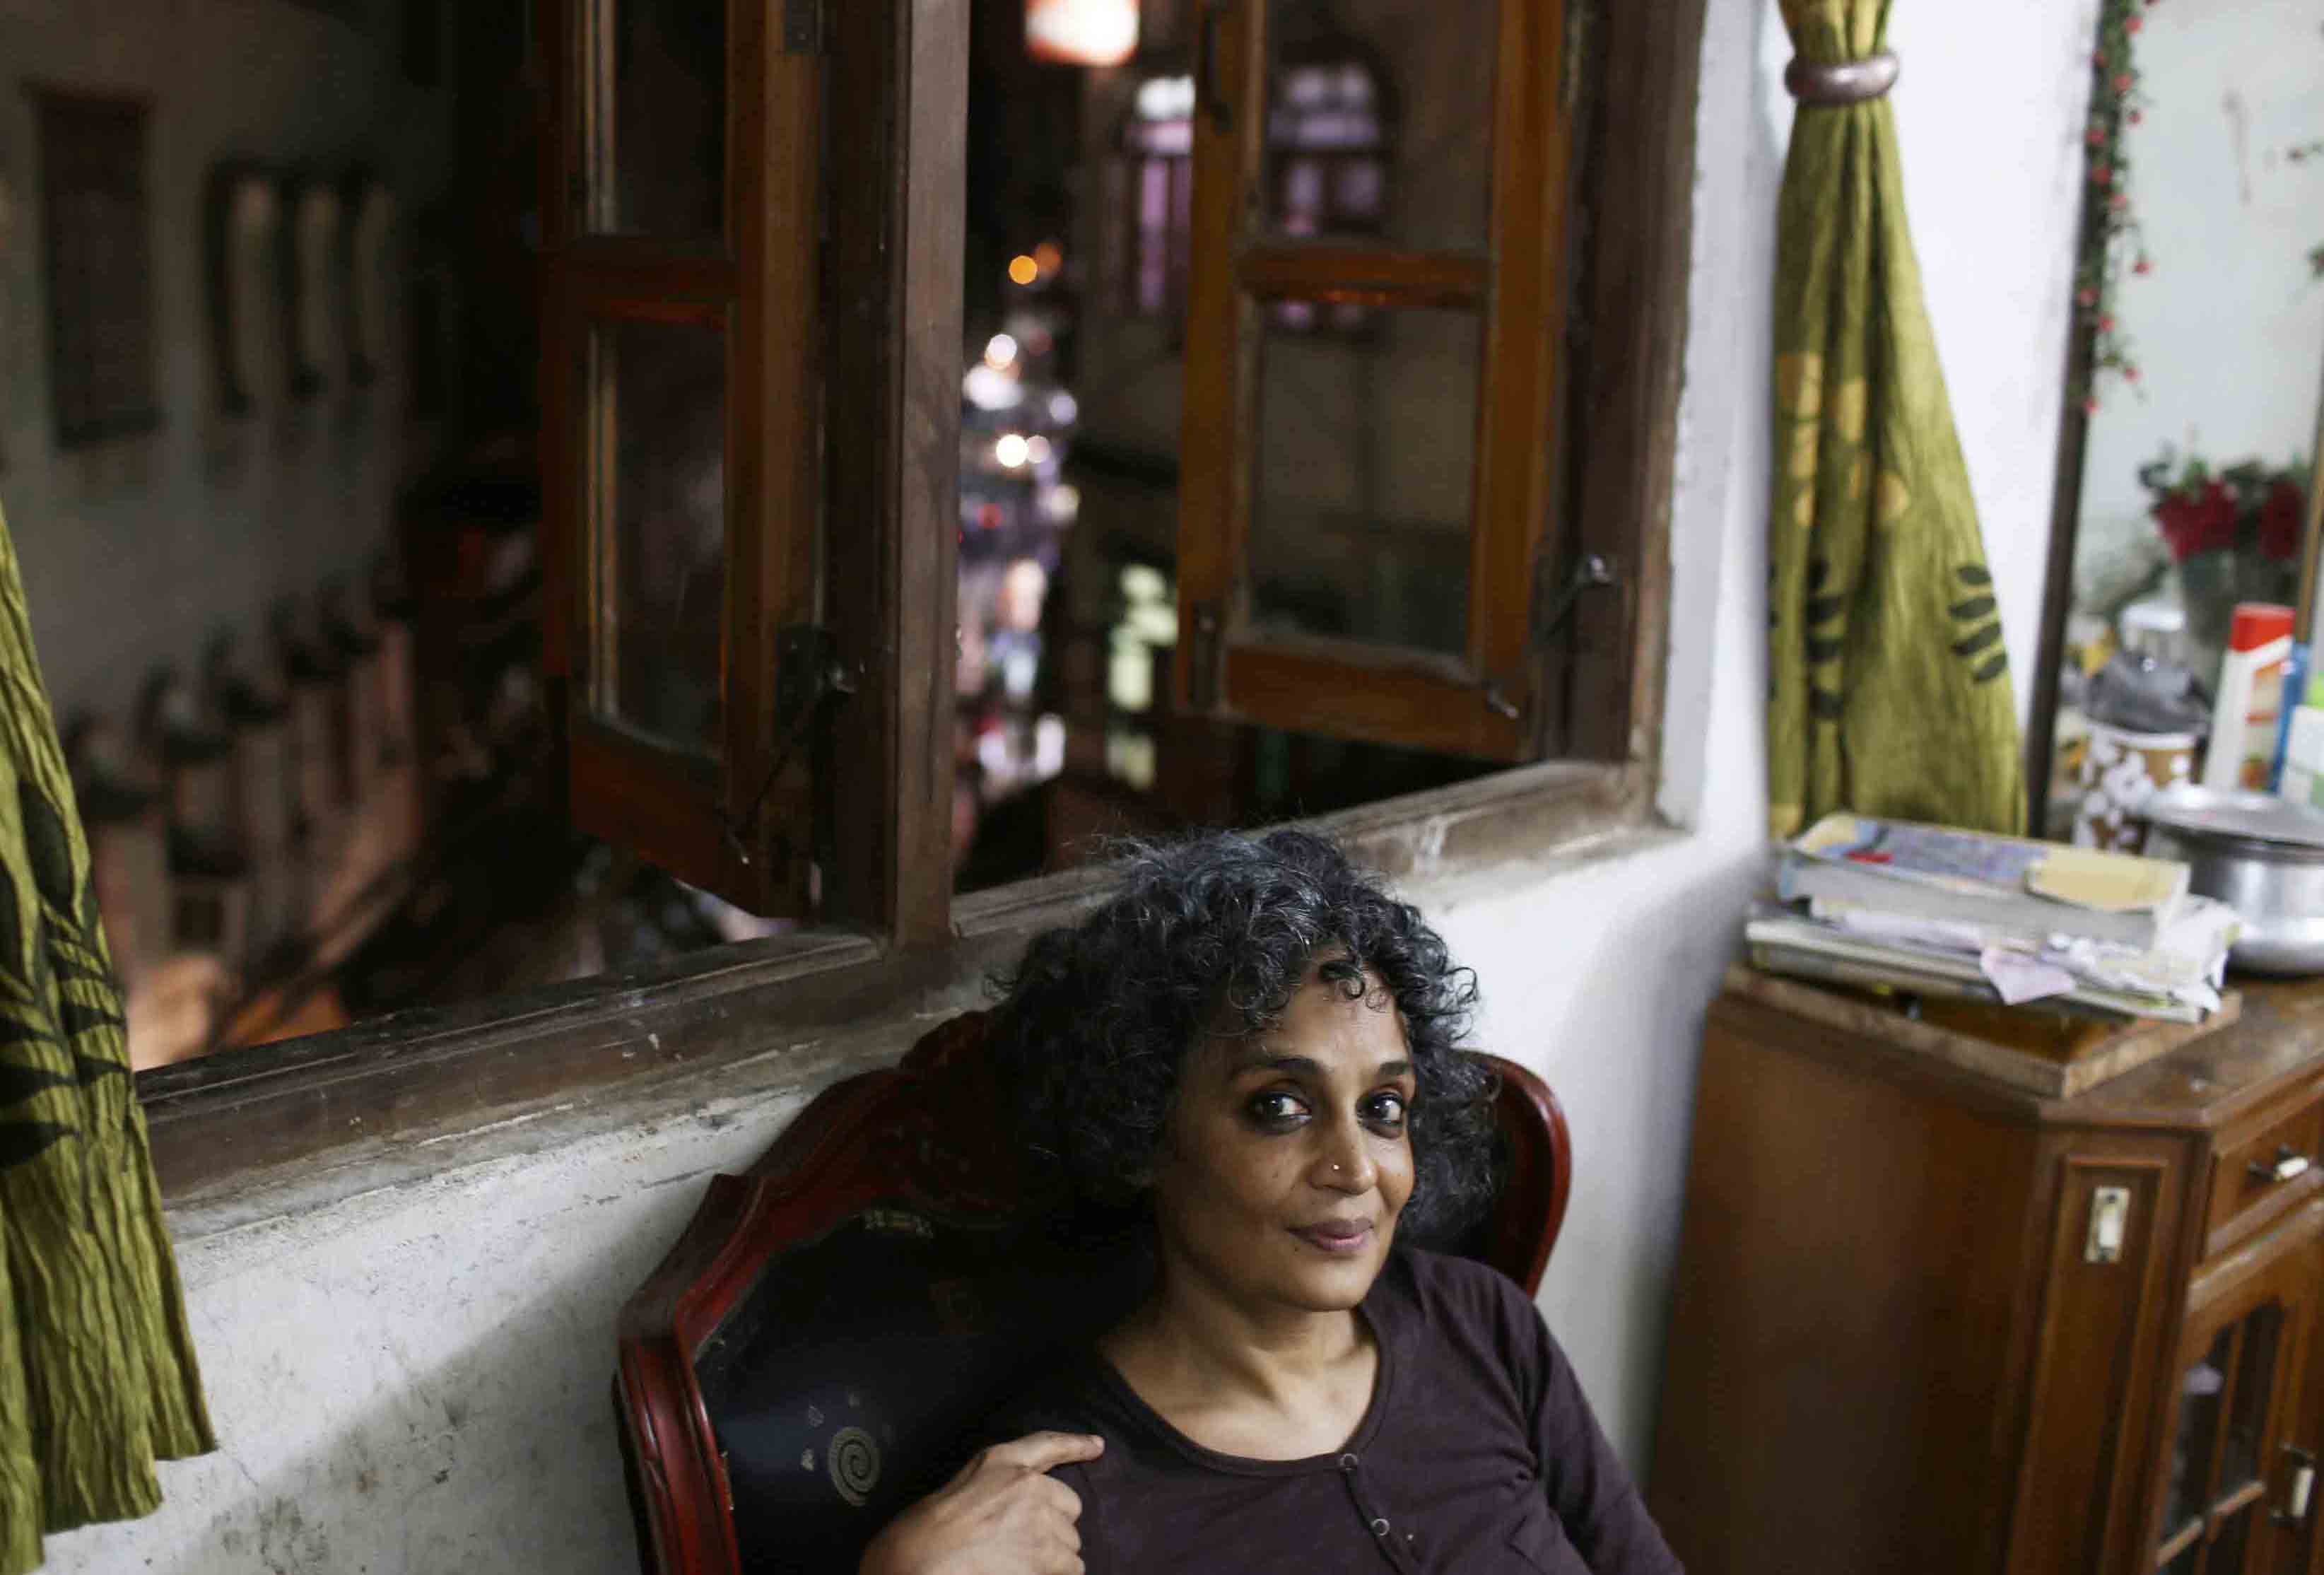 City News – Arundhati Roy’s New Novel After 20 years is... ‘The Ministry of Utmost Happiness’